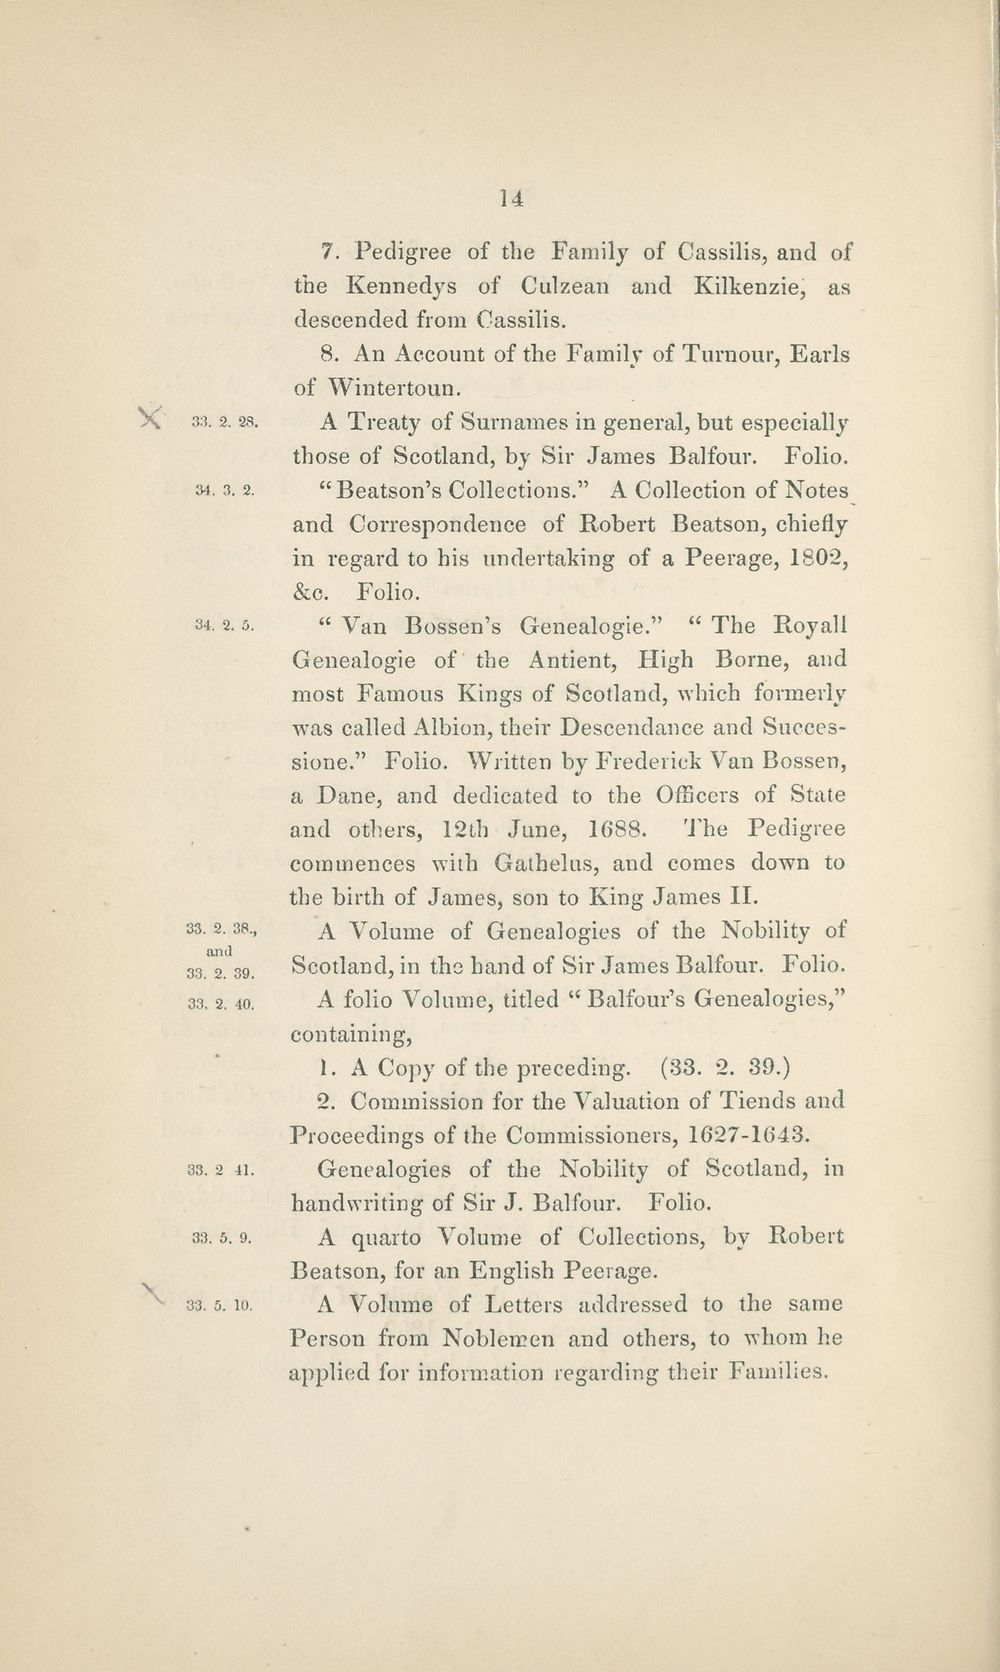 (36) Page 14 - Catalogue of manuscripts relating to genealogy and ...